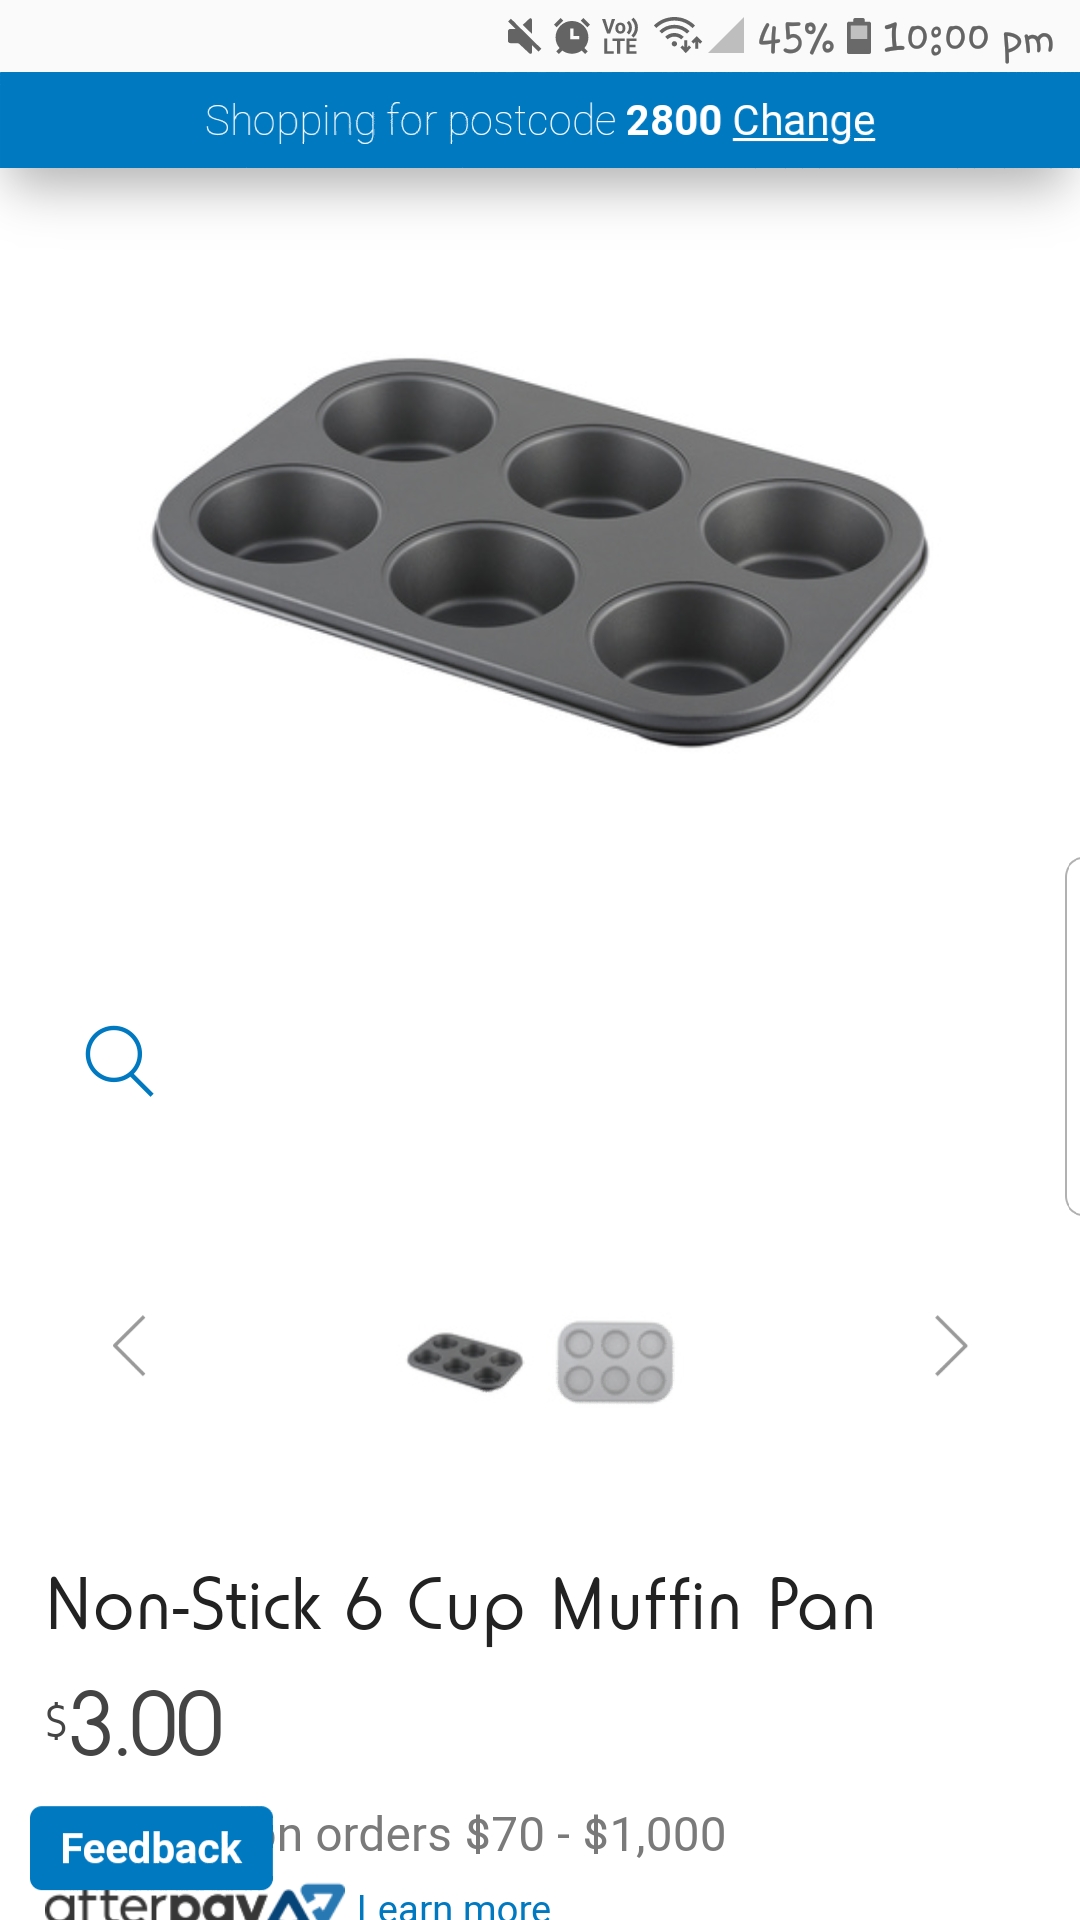 6 cup muffin tray × 2